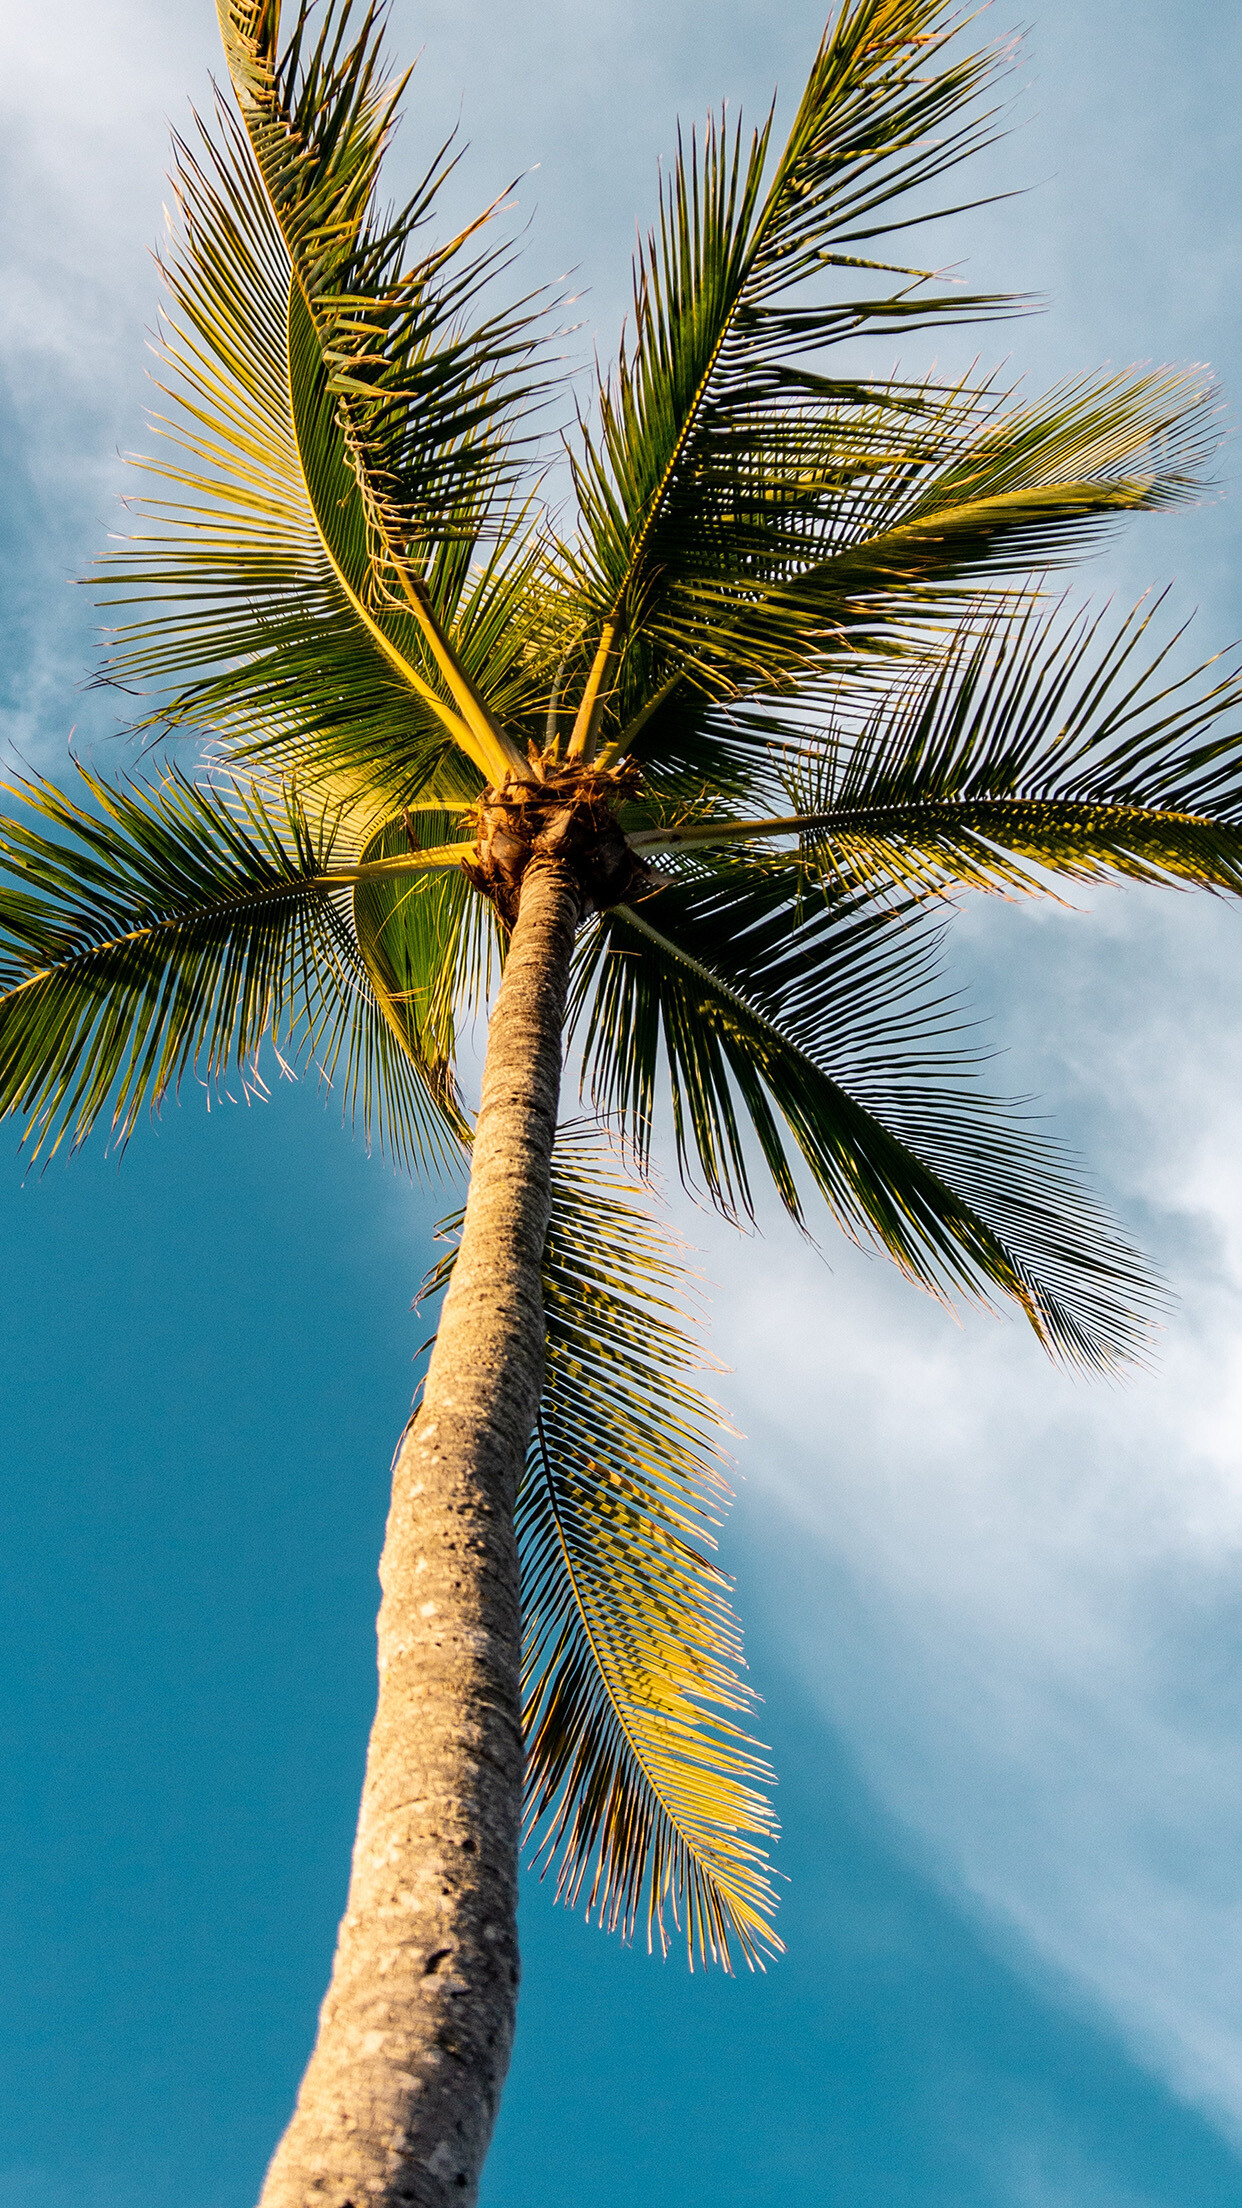 Palm Tree: Washingtonia robusta, Seen in the Los Angeles and Southern California area, can grow up to 98 feet tall. 1250x2210 HD Wallpaper.